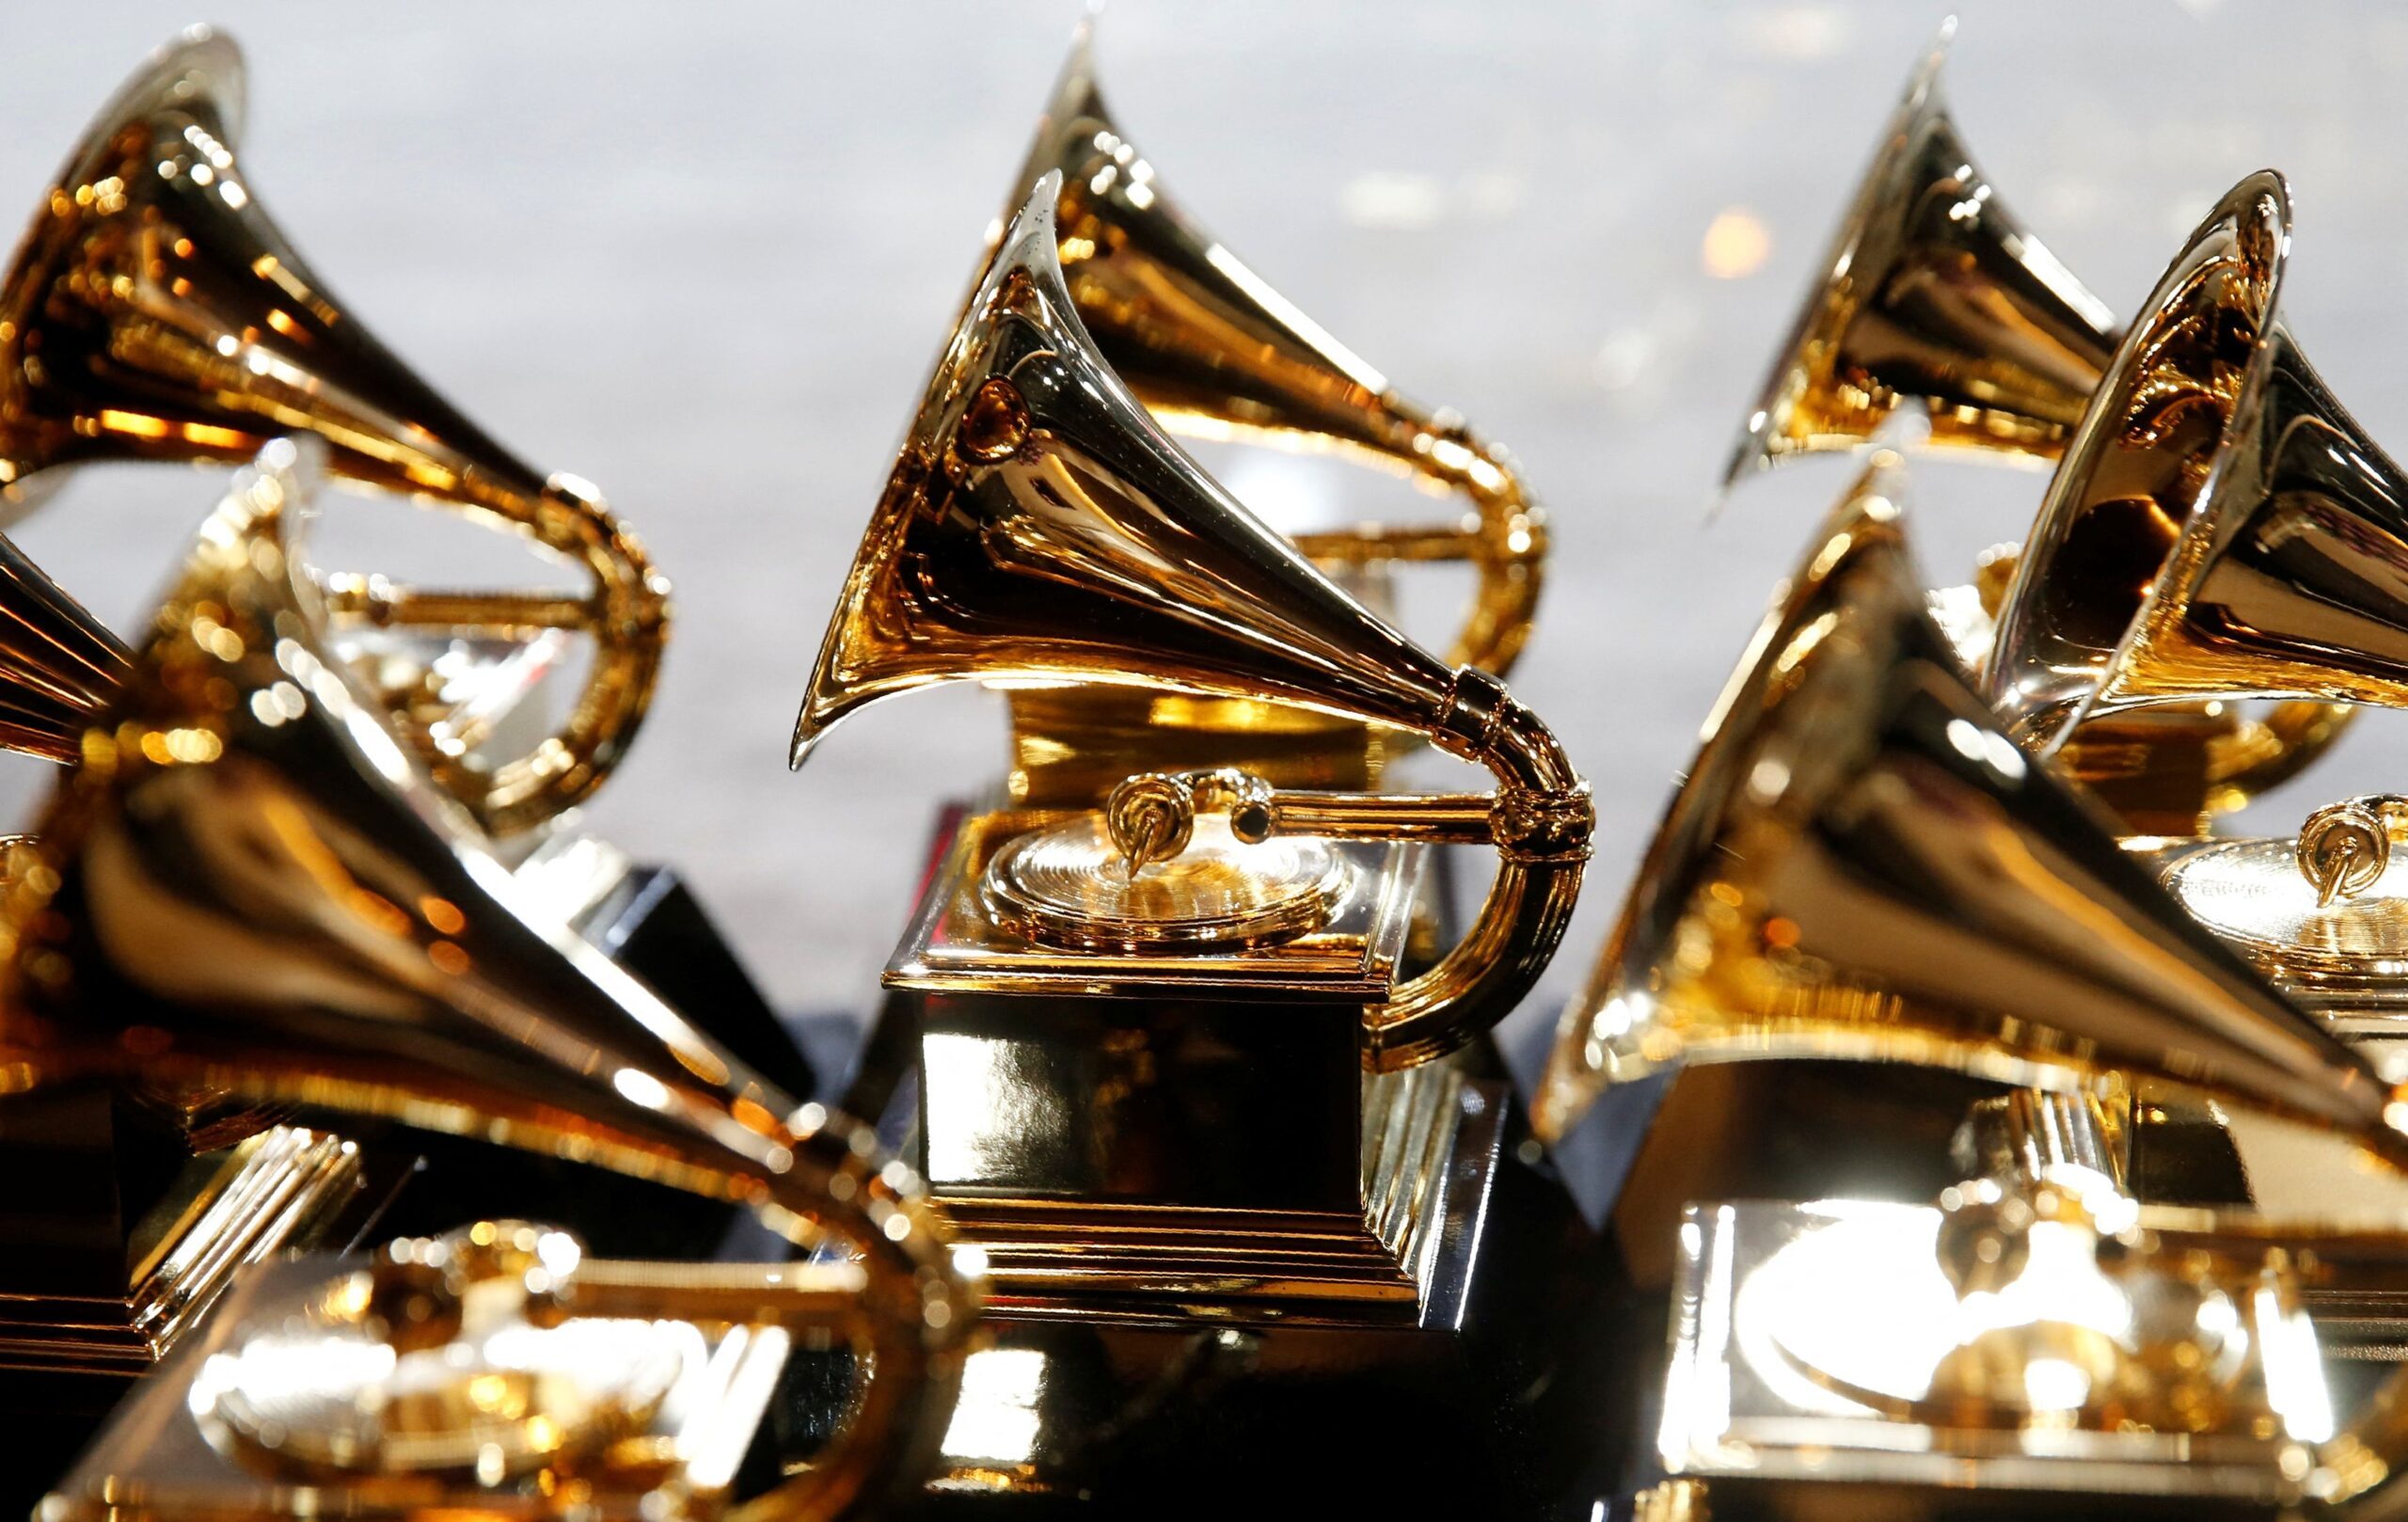 Grammy Awards 2022 moved to April 3 in Las Vegas